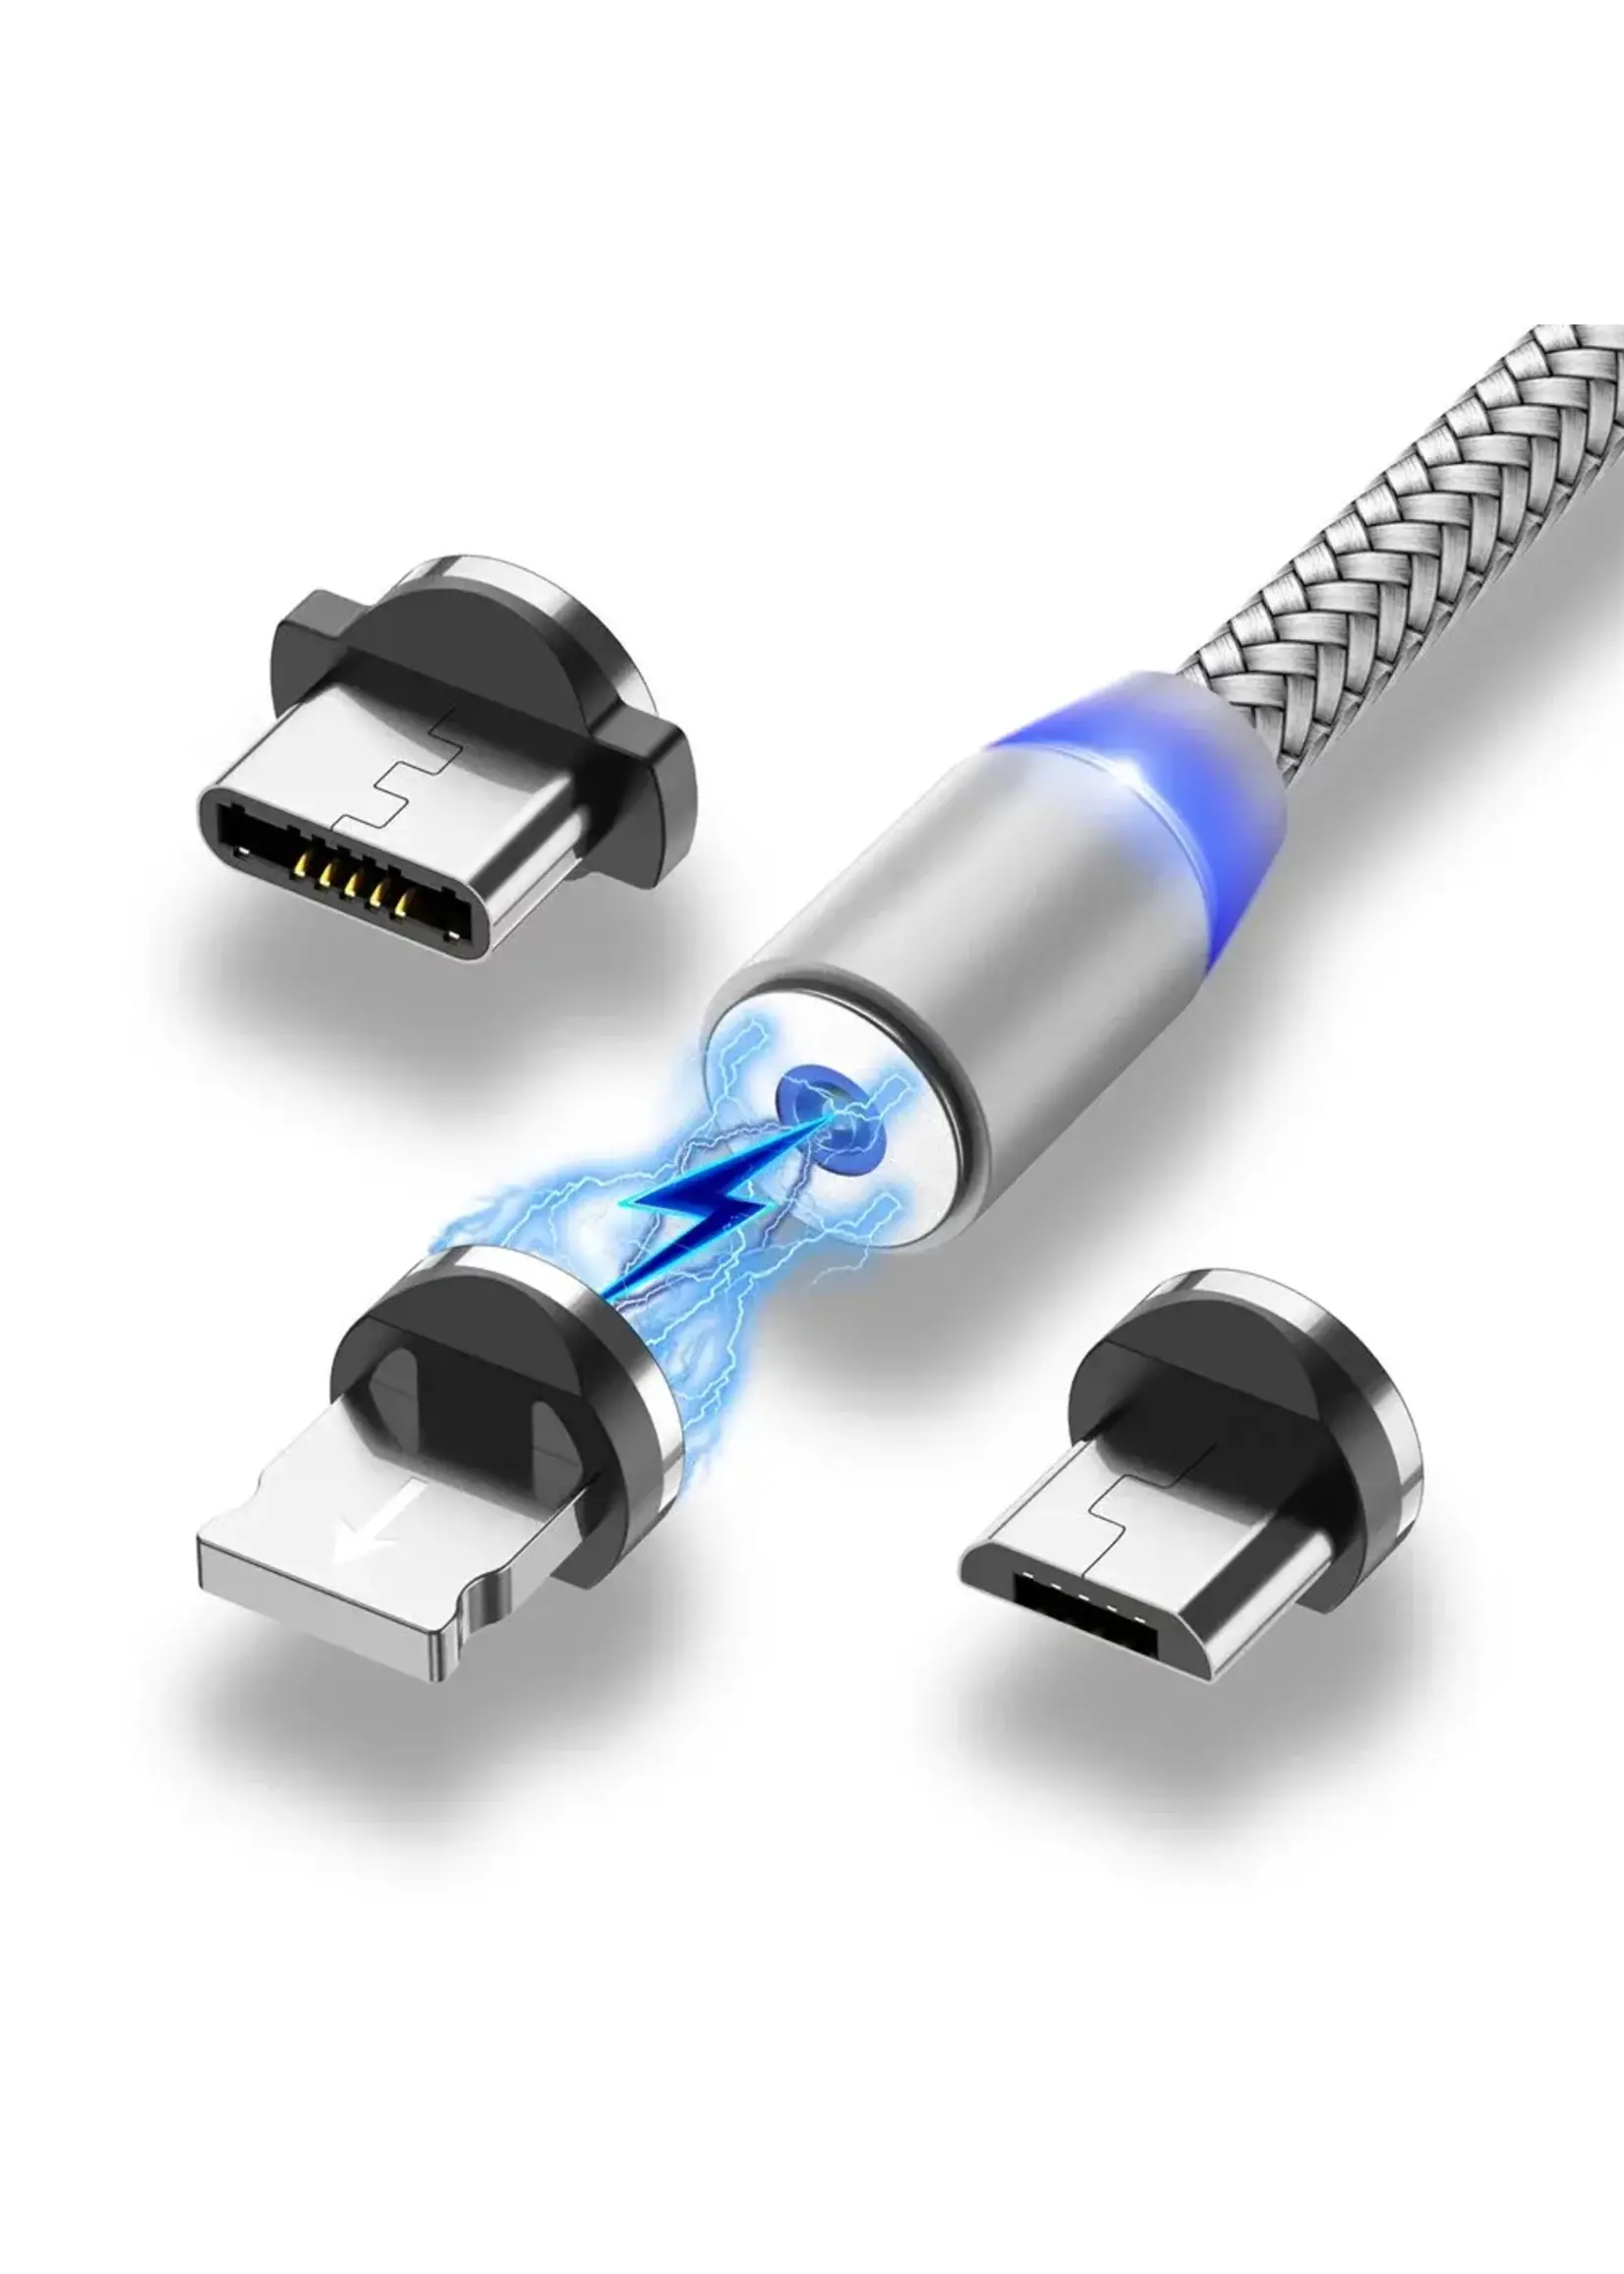 Magnetic Lightning USB Charge Cable HOCO 3FT